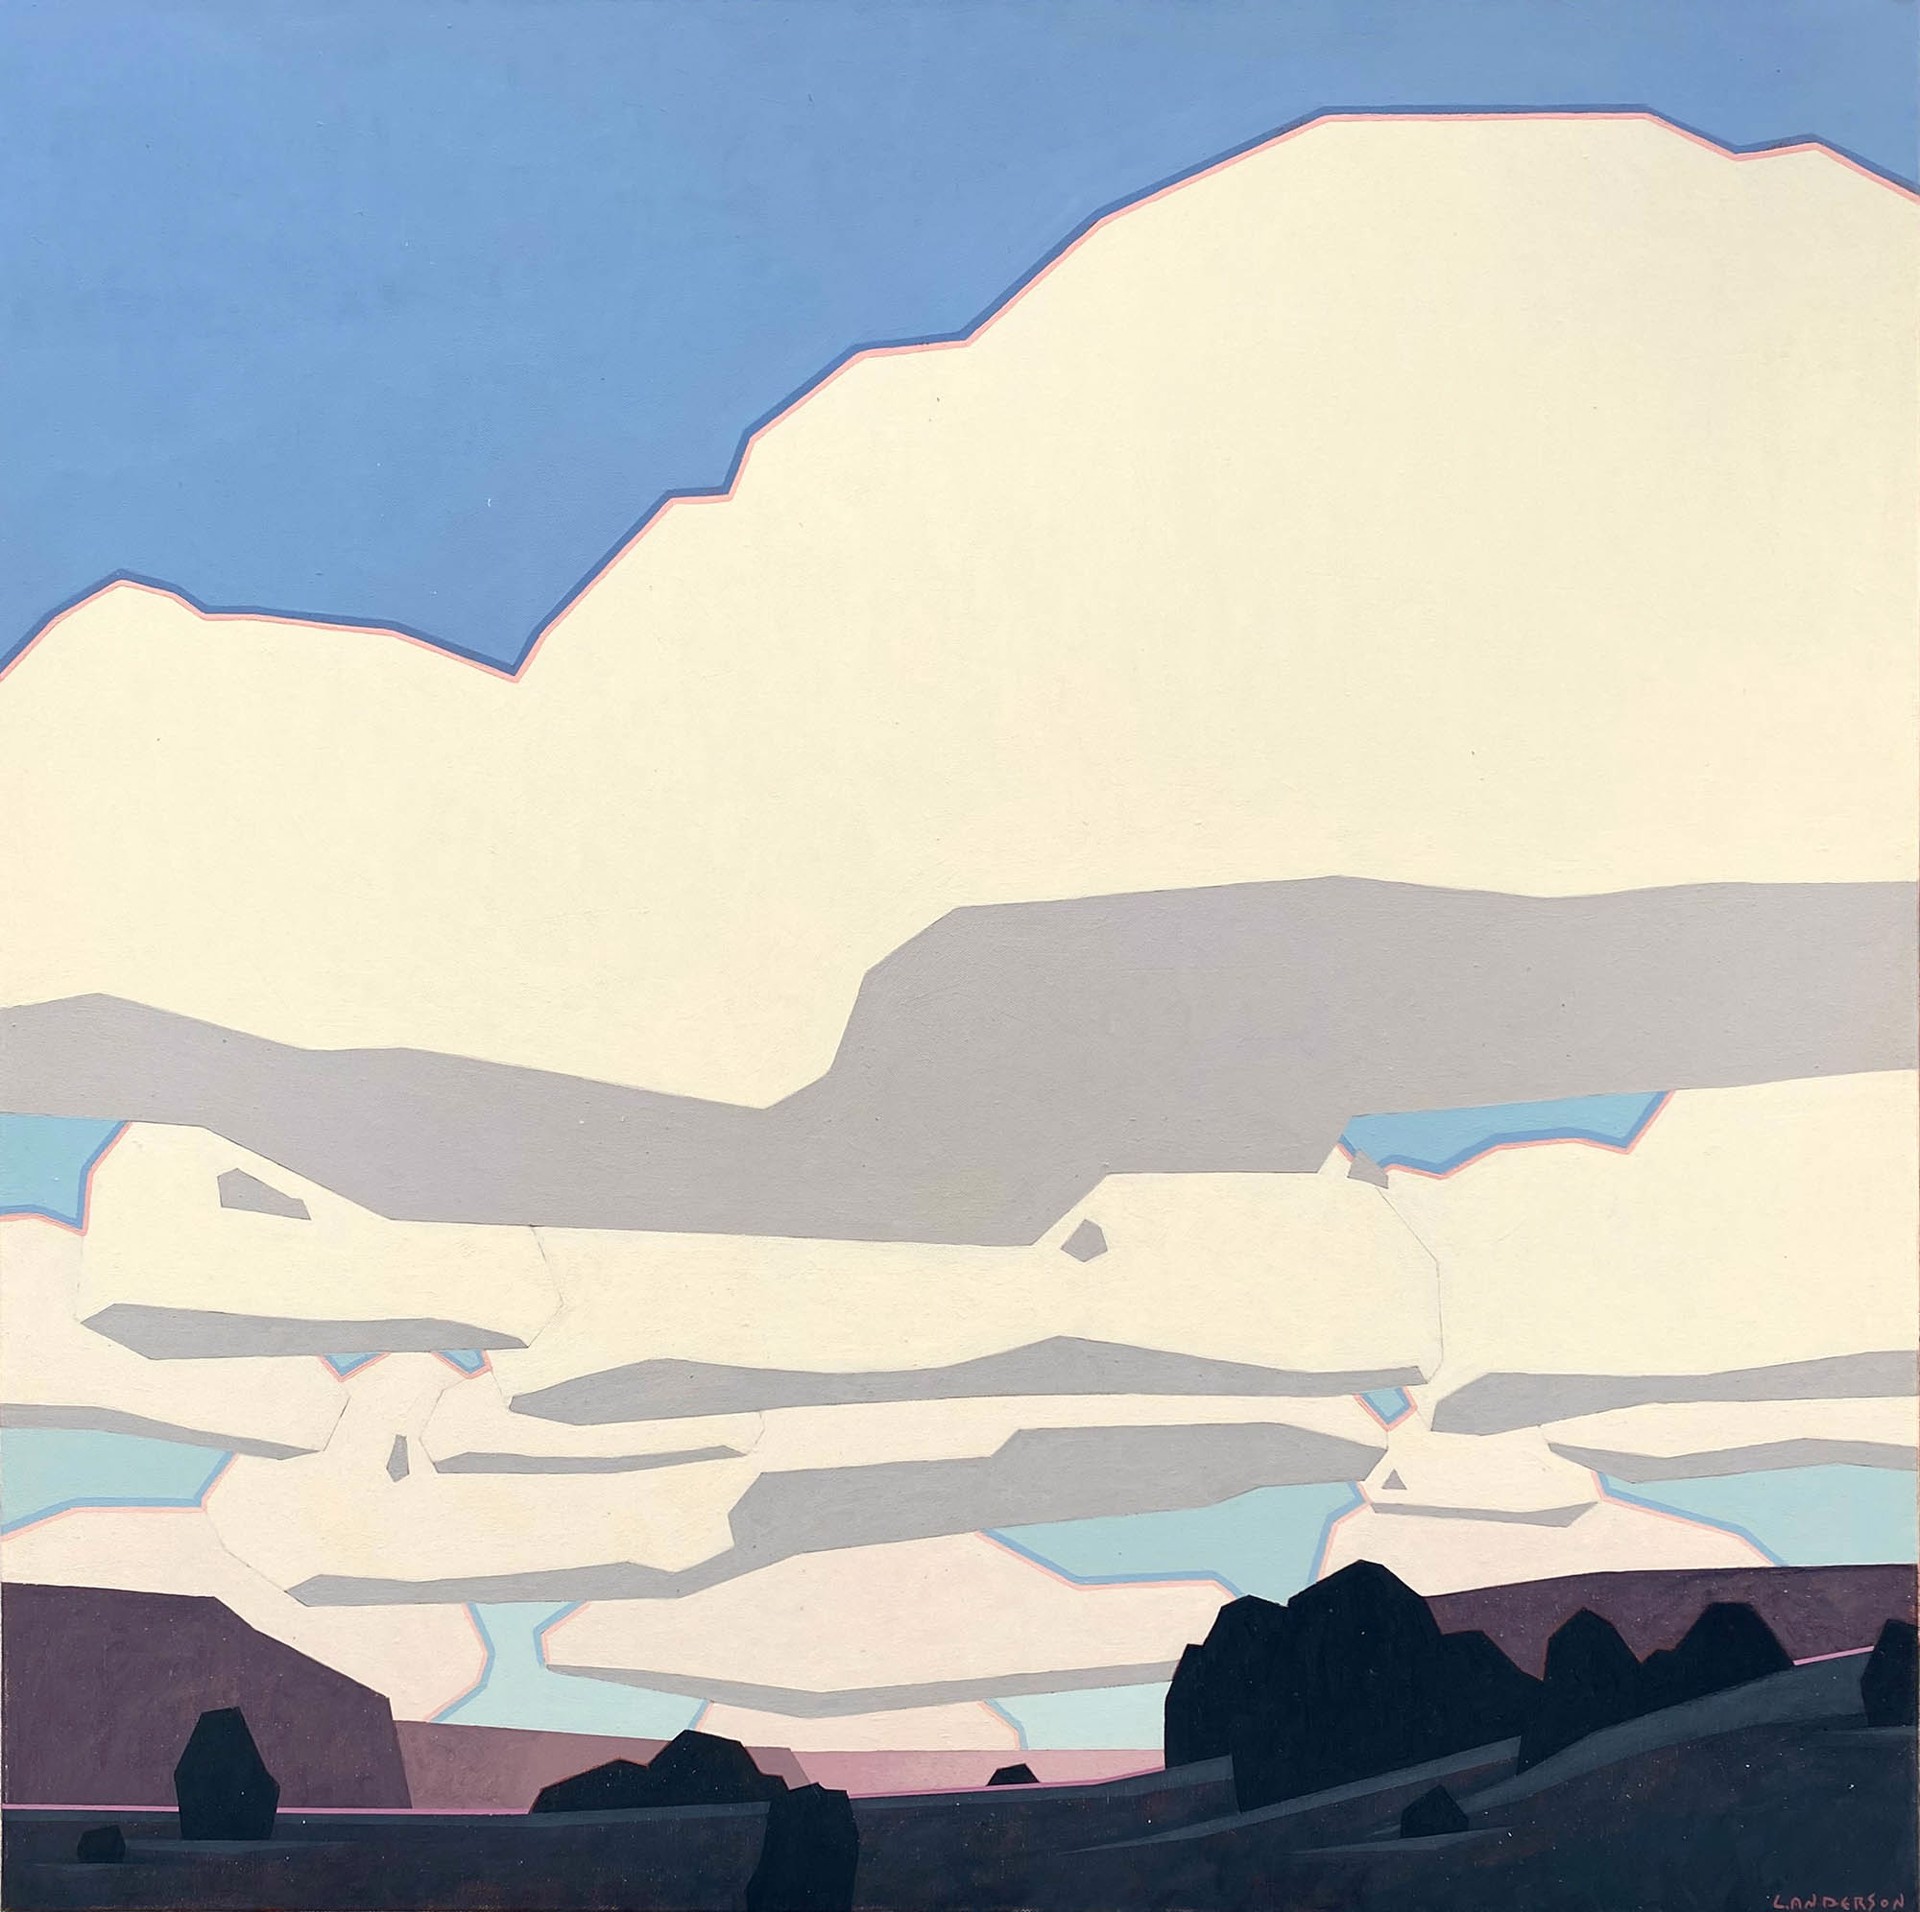 Original Painting By Luke Anderson Featuring Graphic White Clouds Over Landscape